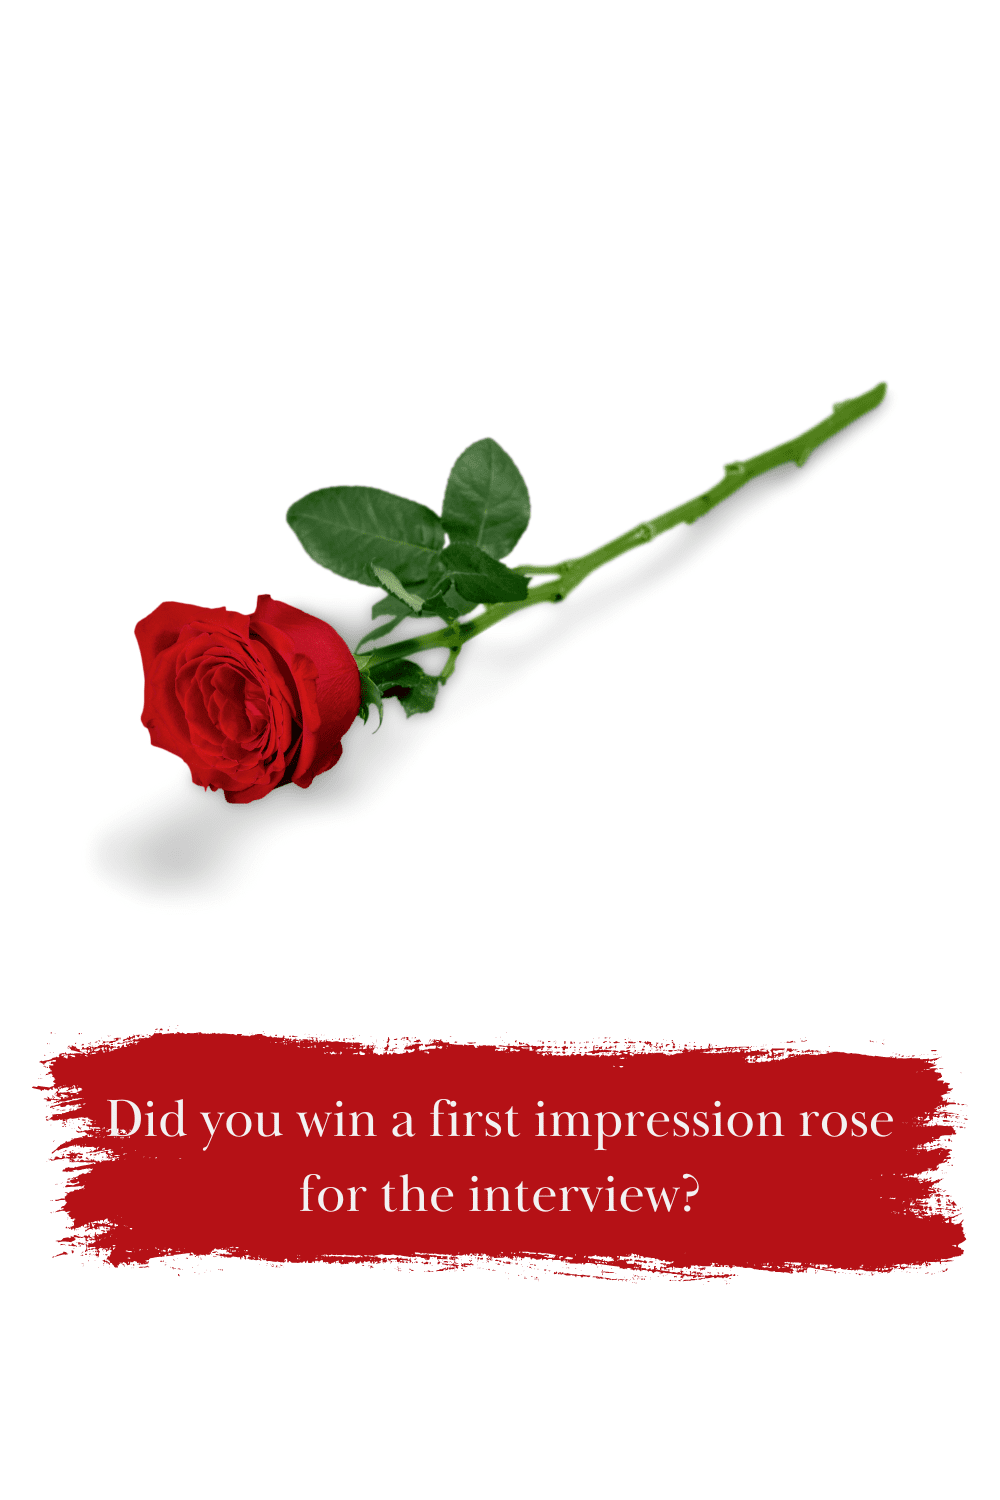 Did you win a first impression rose for the interview?